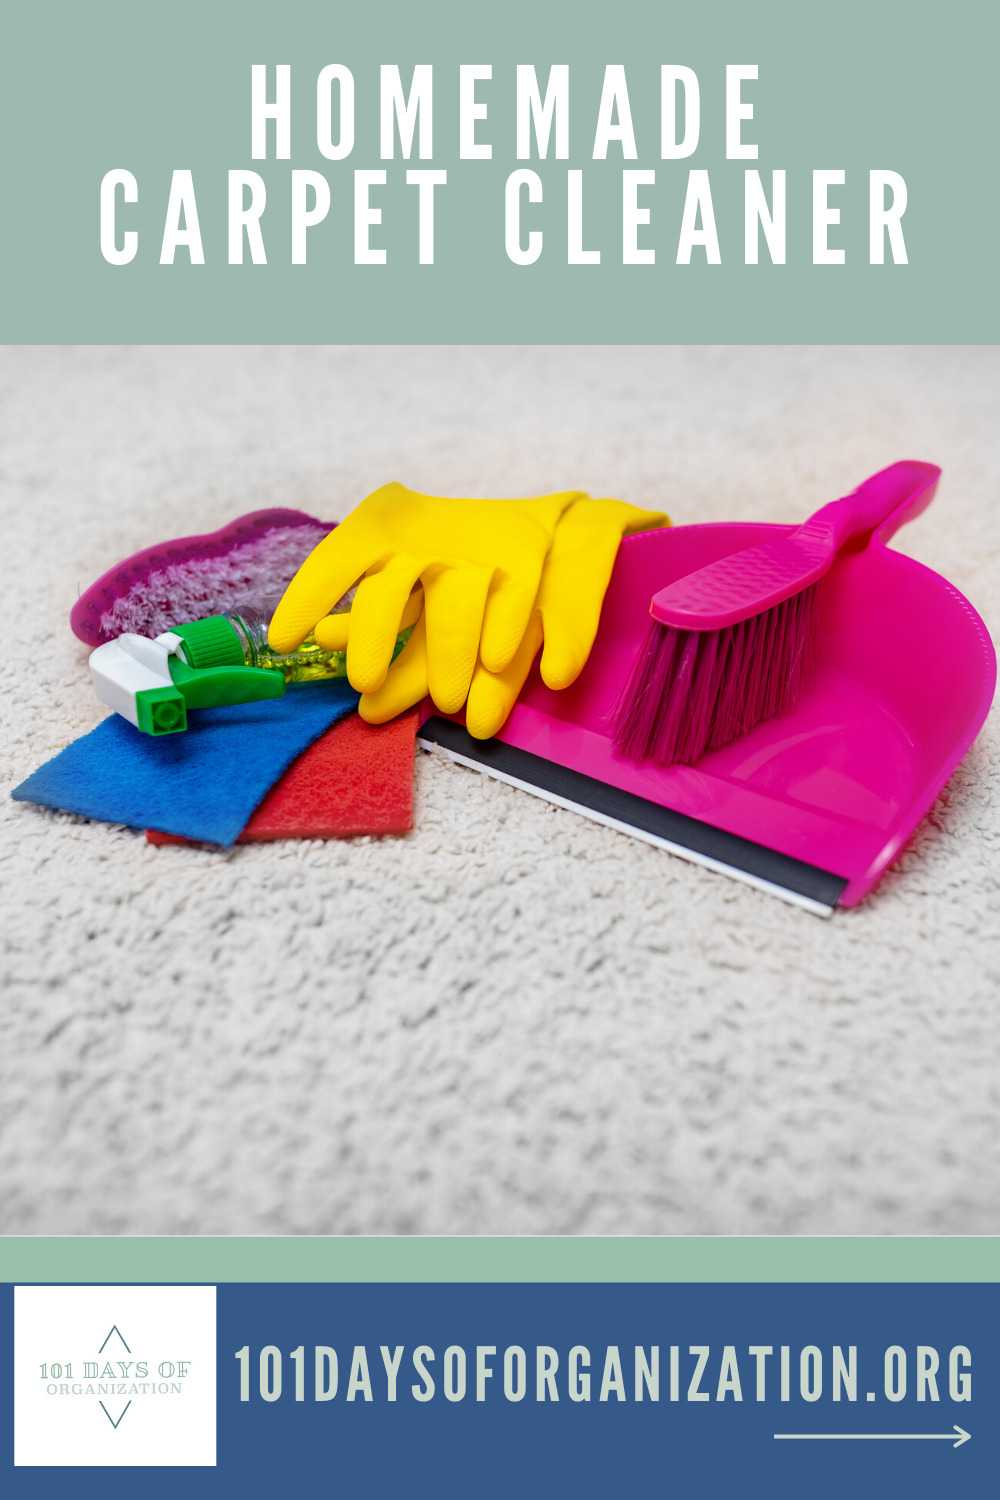 Not all store bought items work better than homemade cleaners. Especially when it comes to carpets. If you have some tough stains and or odors, keep reading. This is an easy solution to make and it's cheap. #carpetcleaninghacks #cleaningtips #homemadecarpetcleaner #101daysoforganizationblog